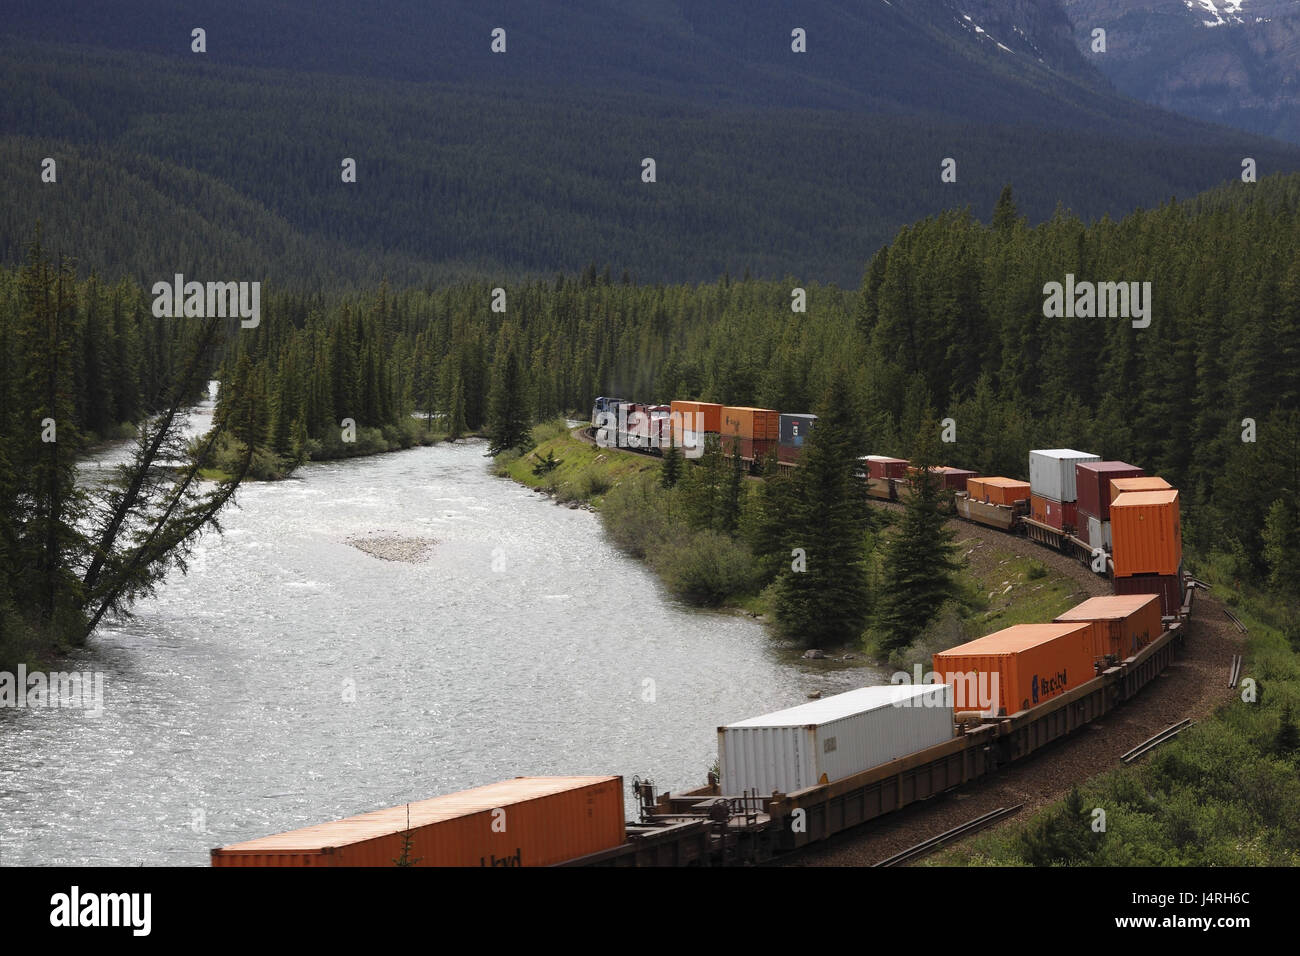 Goods train, Canadian Pacific Railway, river, tracks, sinuously, scenery, wooded, Canada, Alberta, Banff Nationwide park, Bow River, Stock Photo